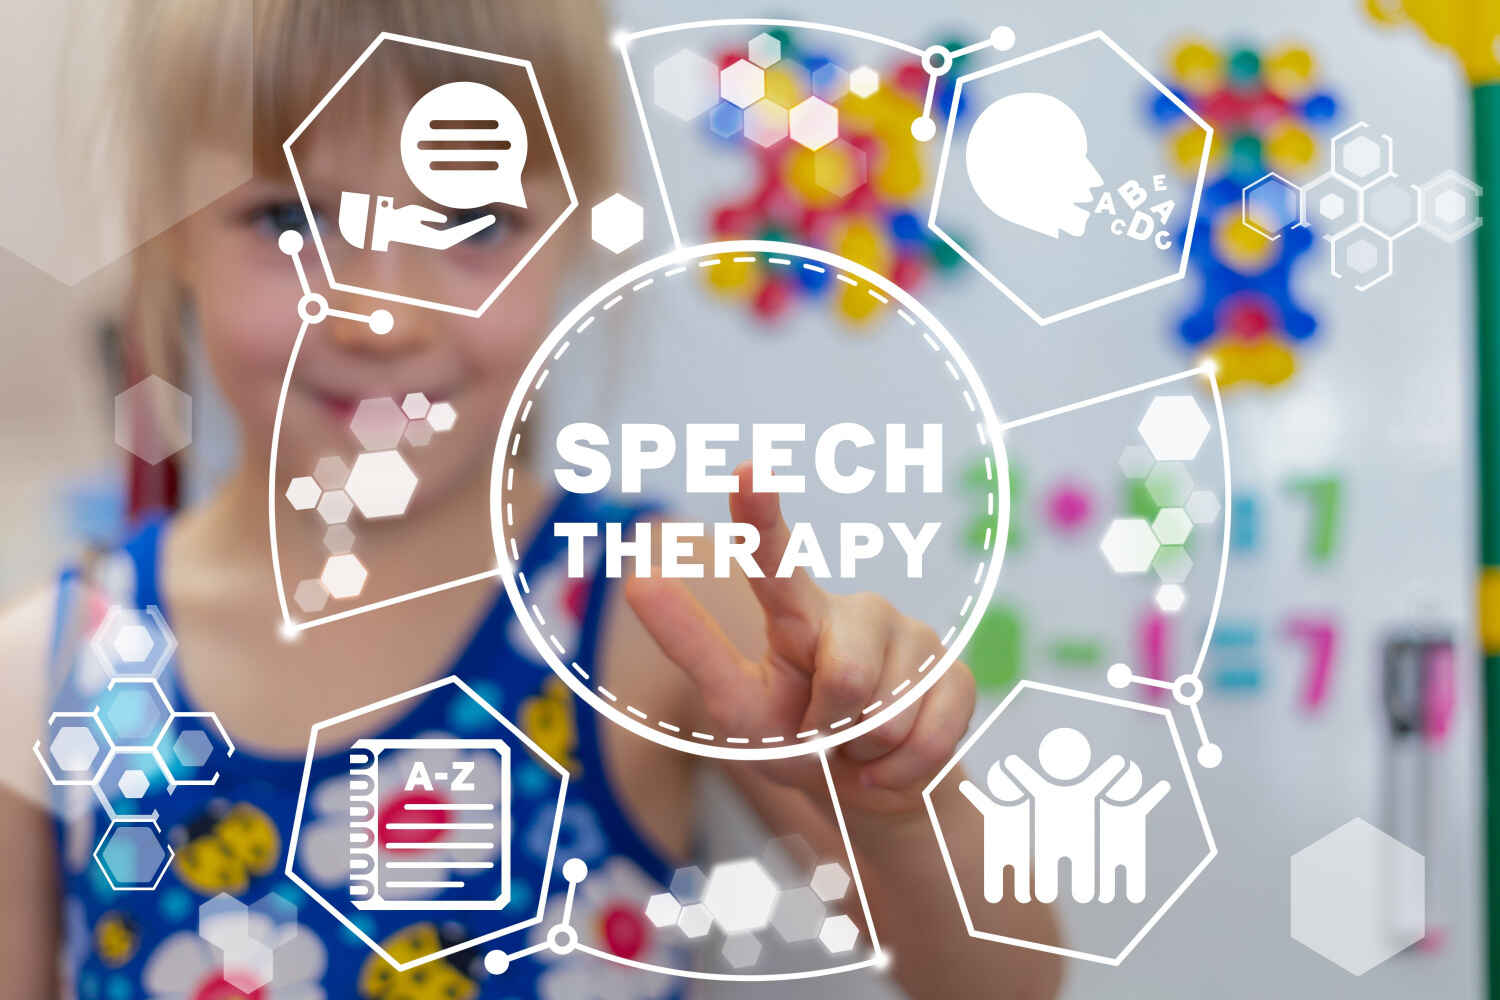 If you feel your child is having problems with speech then better to consult a speech therapist